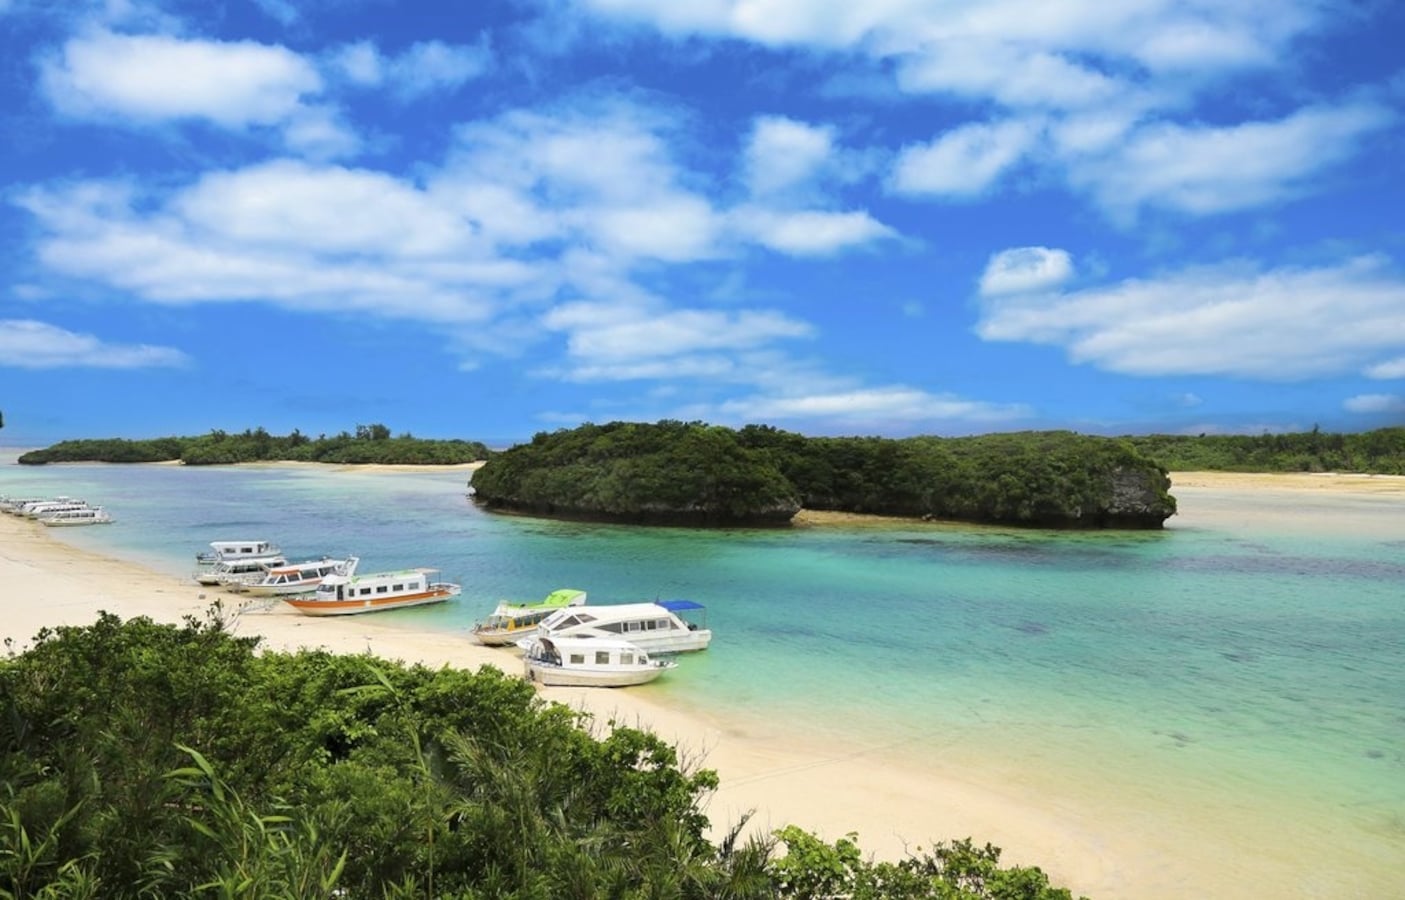 Top 10 Islands Around Okinawa for Beach Lovers | All About Japan